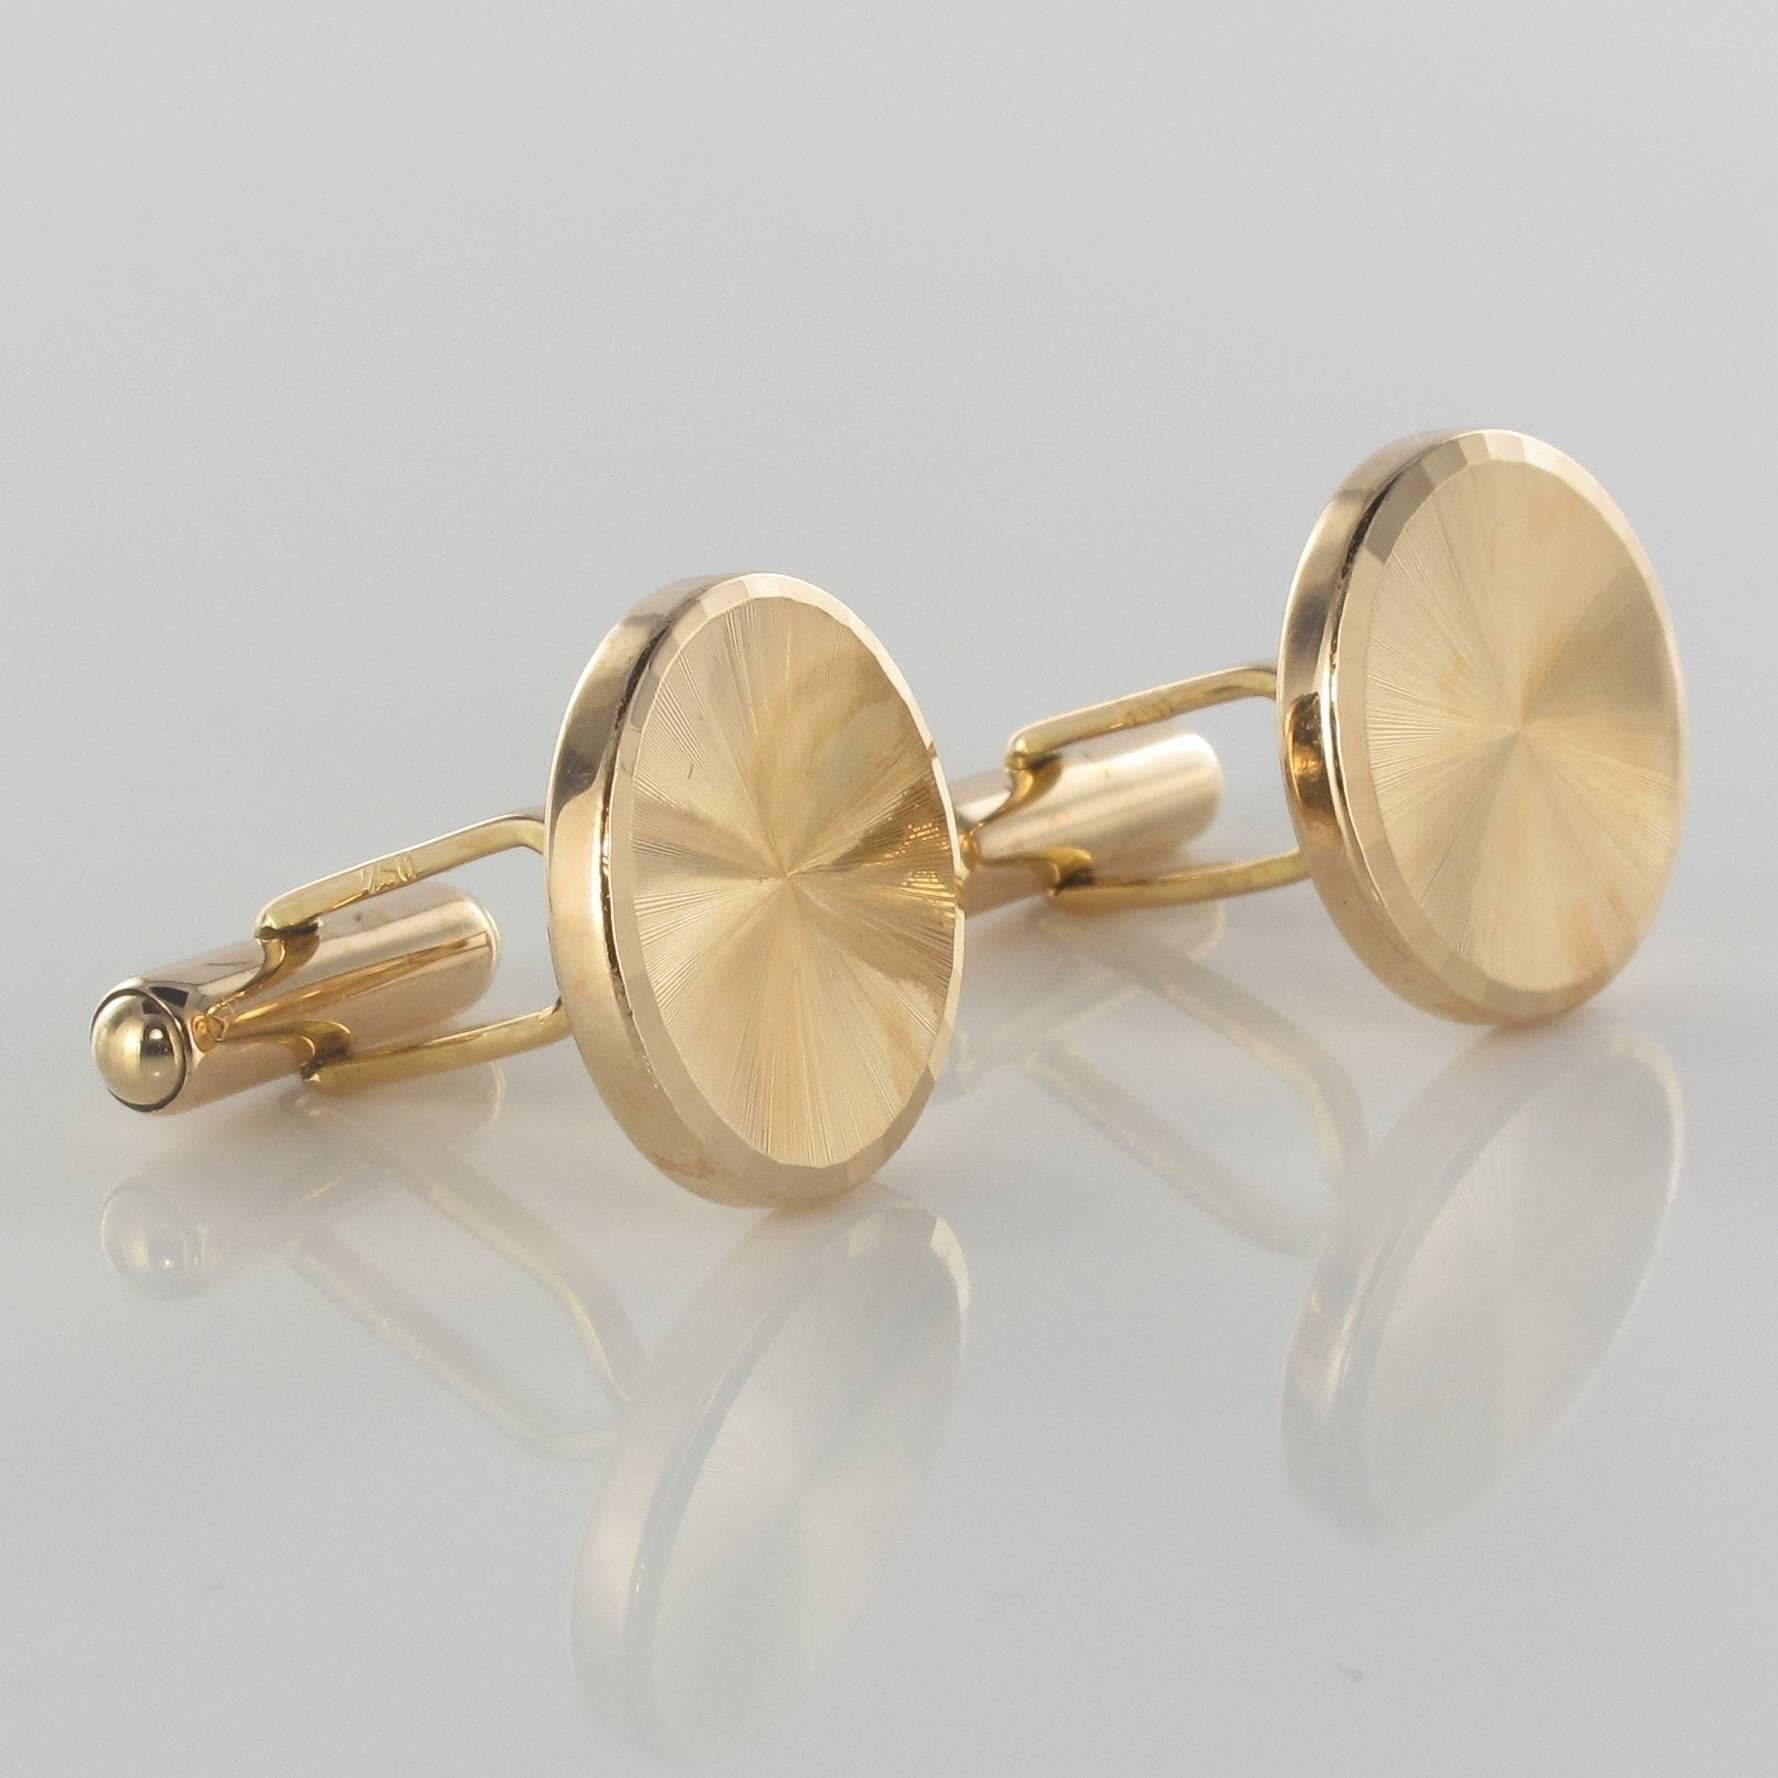 Cufflinks in 18 karats yellow gold, eagle's head hallmark.
Round shape, each cufflink consists of a gold disc engraved with a radiant decor.
Diameter: 16.6 mm, total length: 19.6 mm, thickness: 2.3 mm.
Total weight of the jewel: 9.2 g